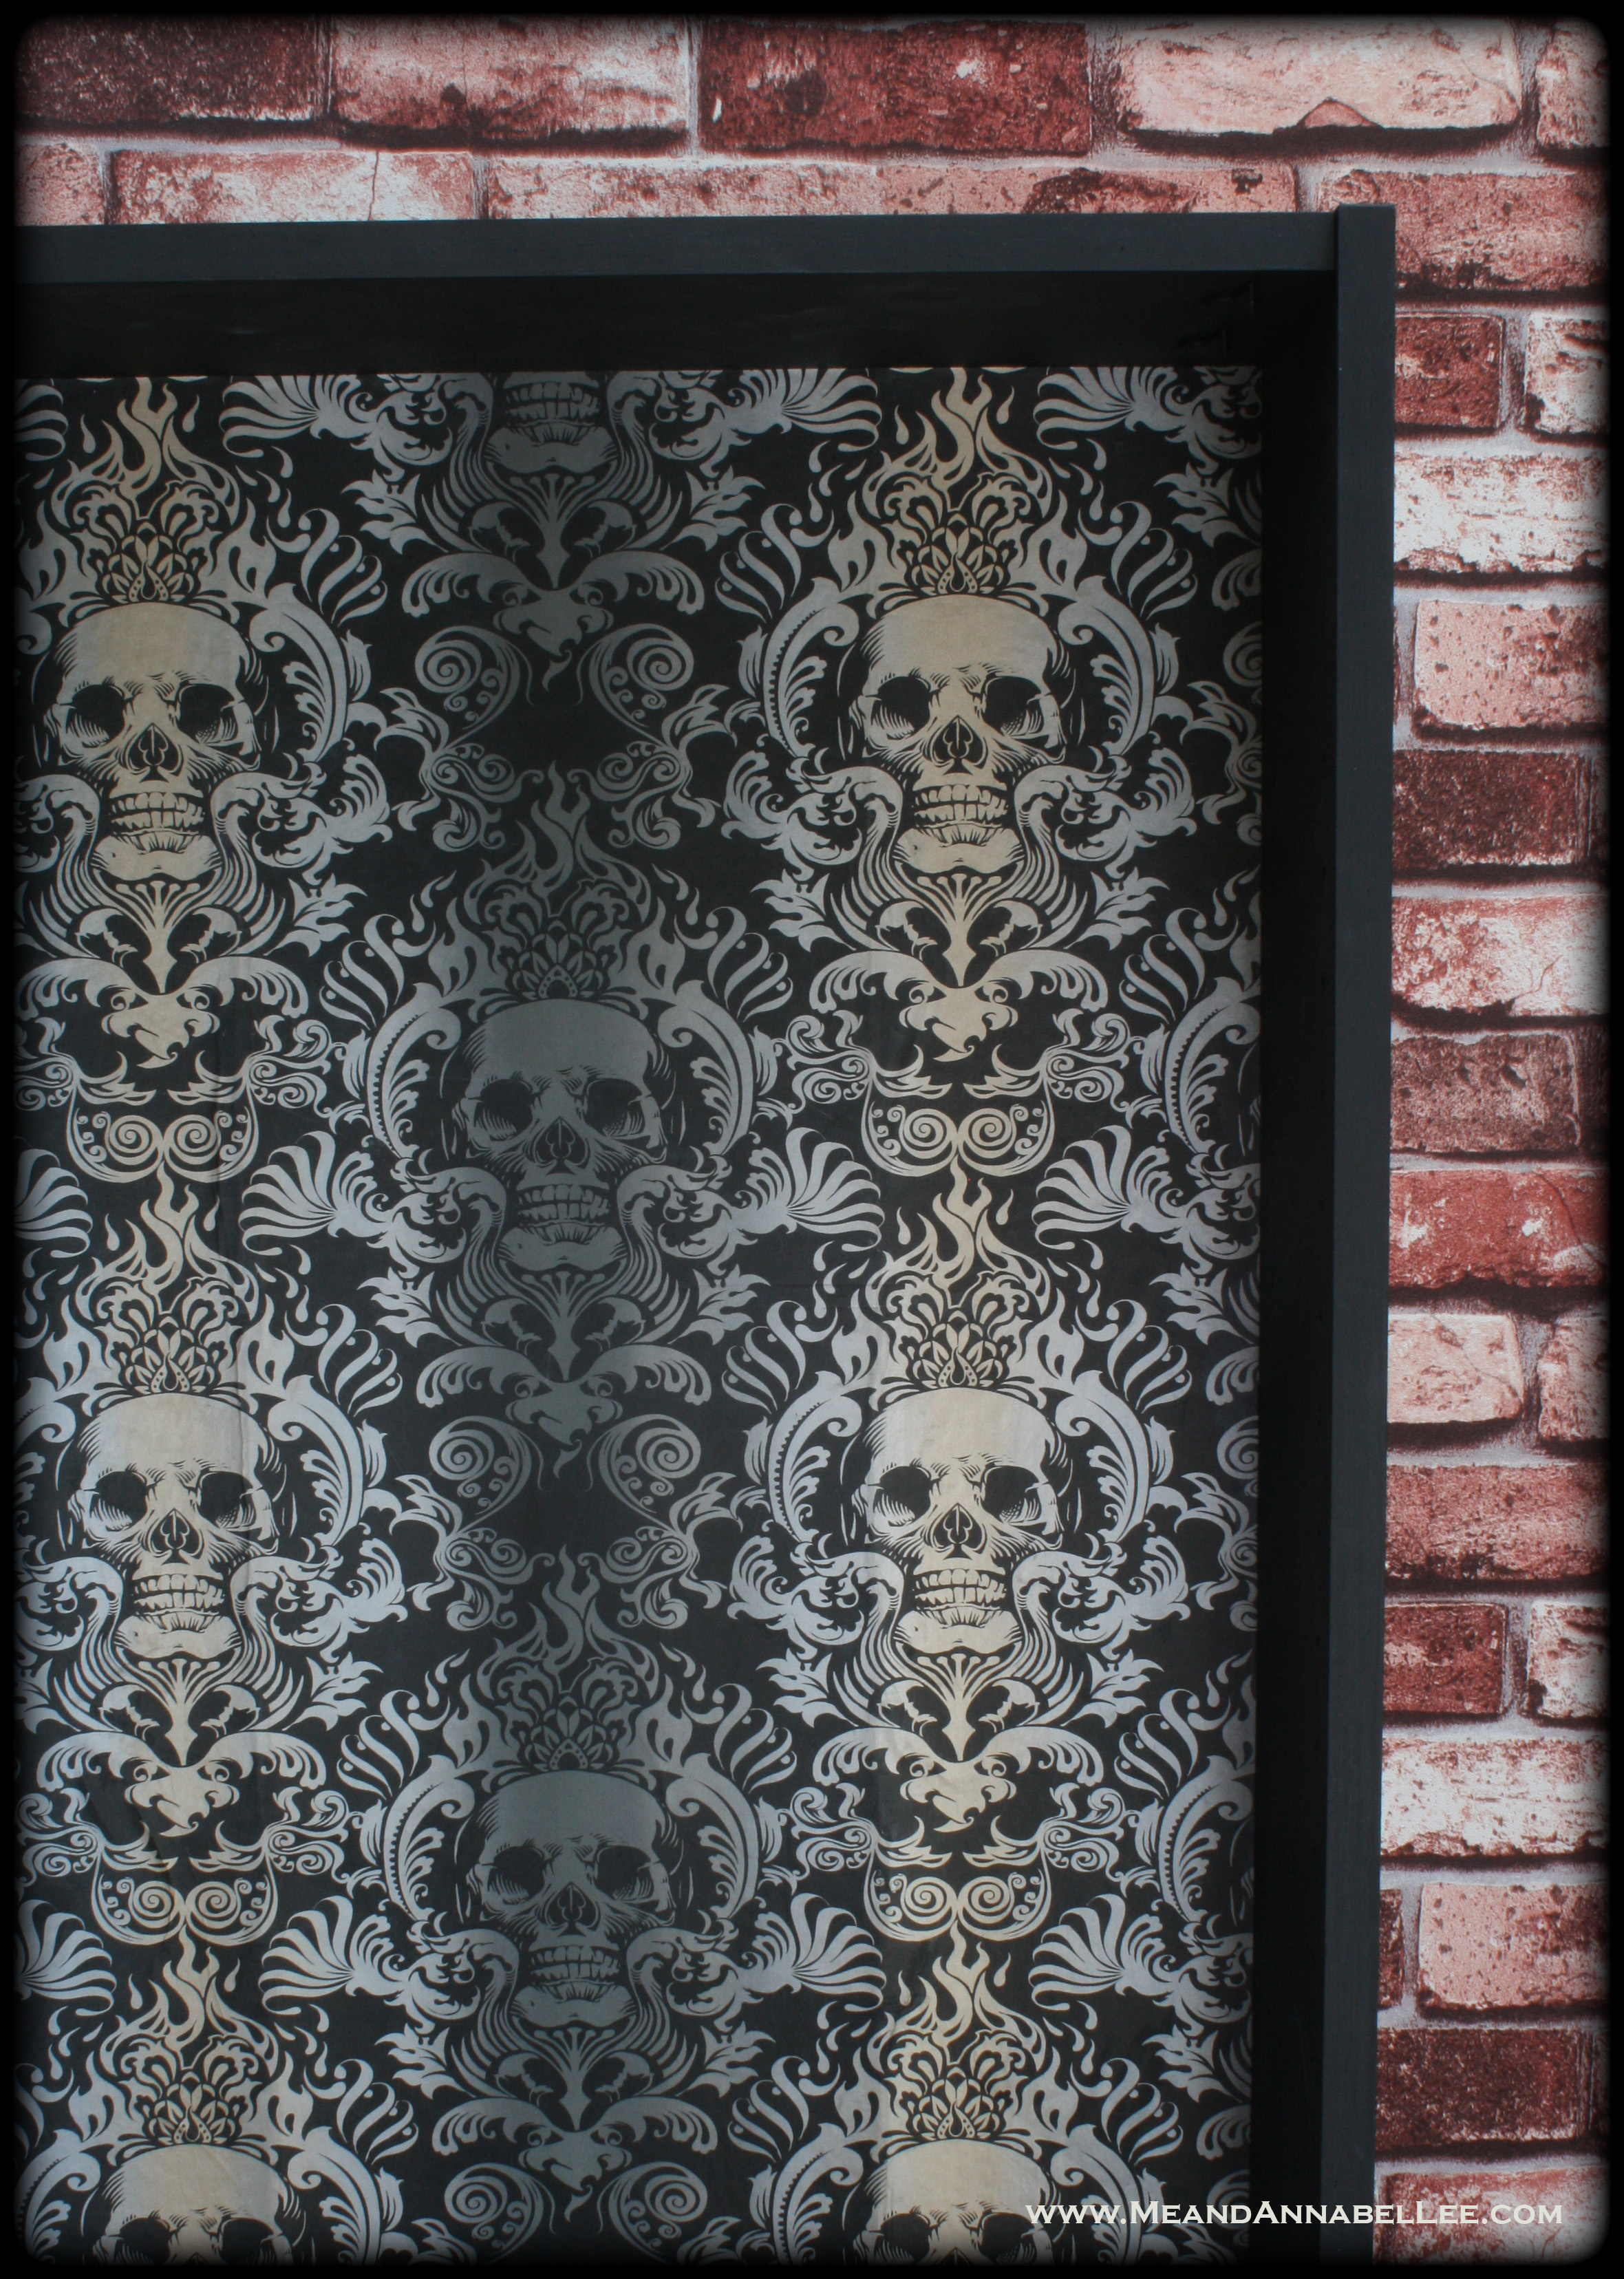 Black & Gold Baroque Skull Wallpaper | How to Apply to a Book Case | Goth Home Decor | www.MeandAnnabelLee.com